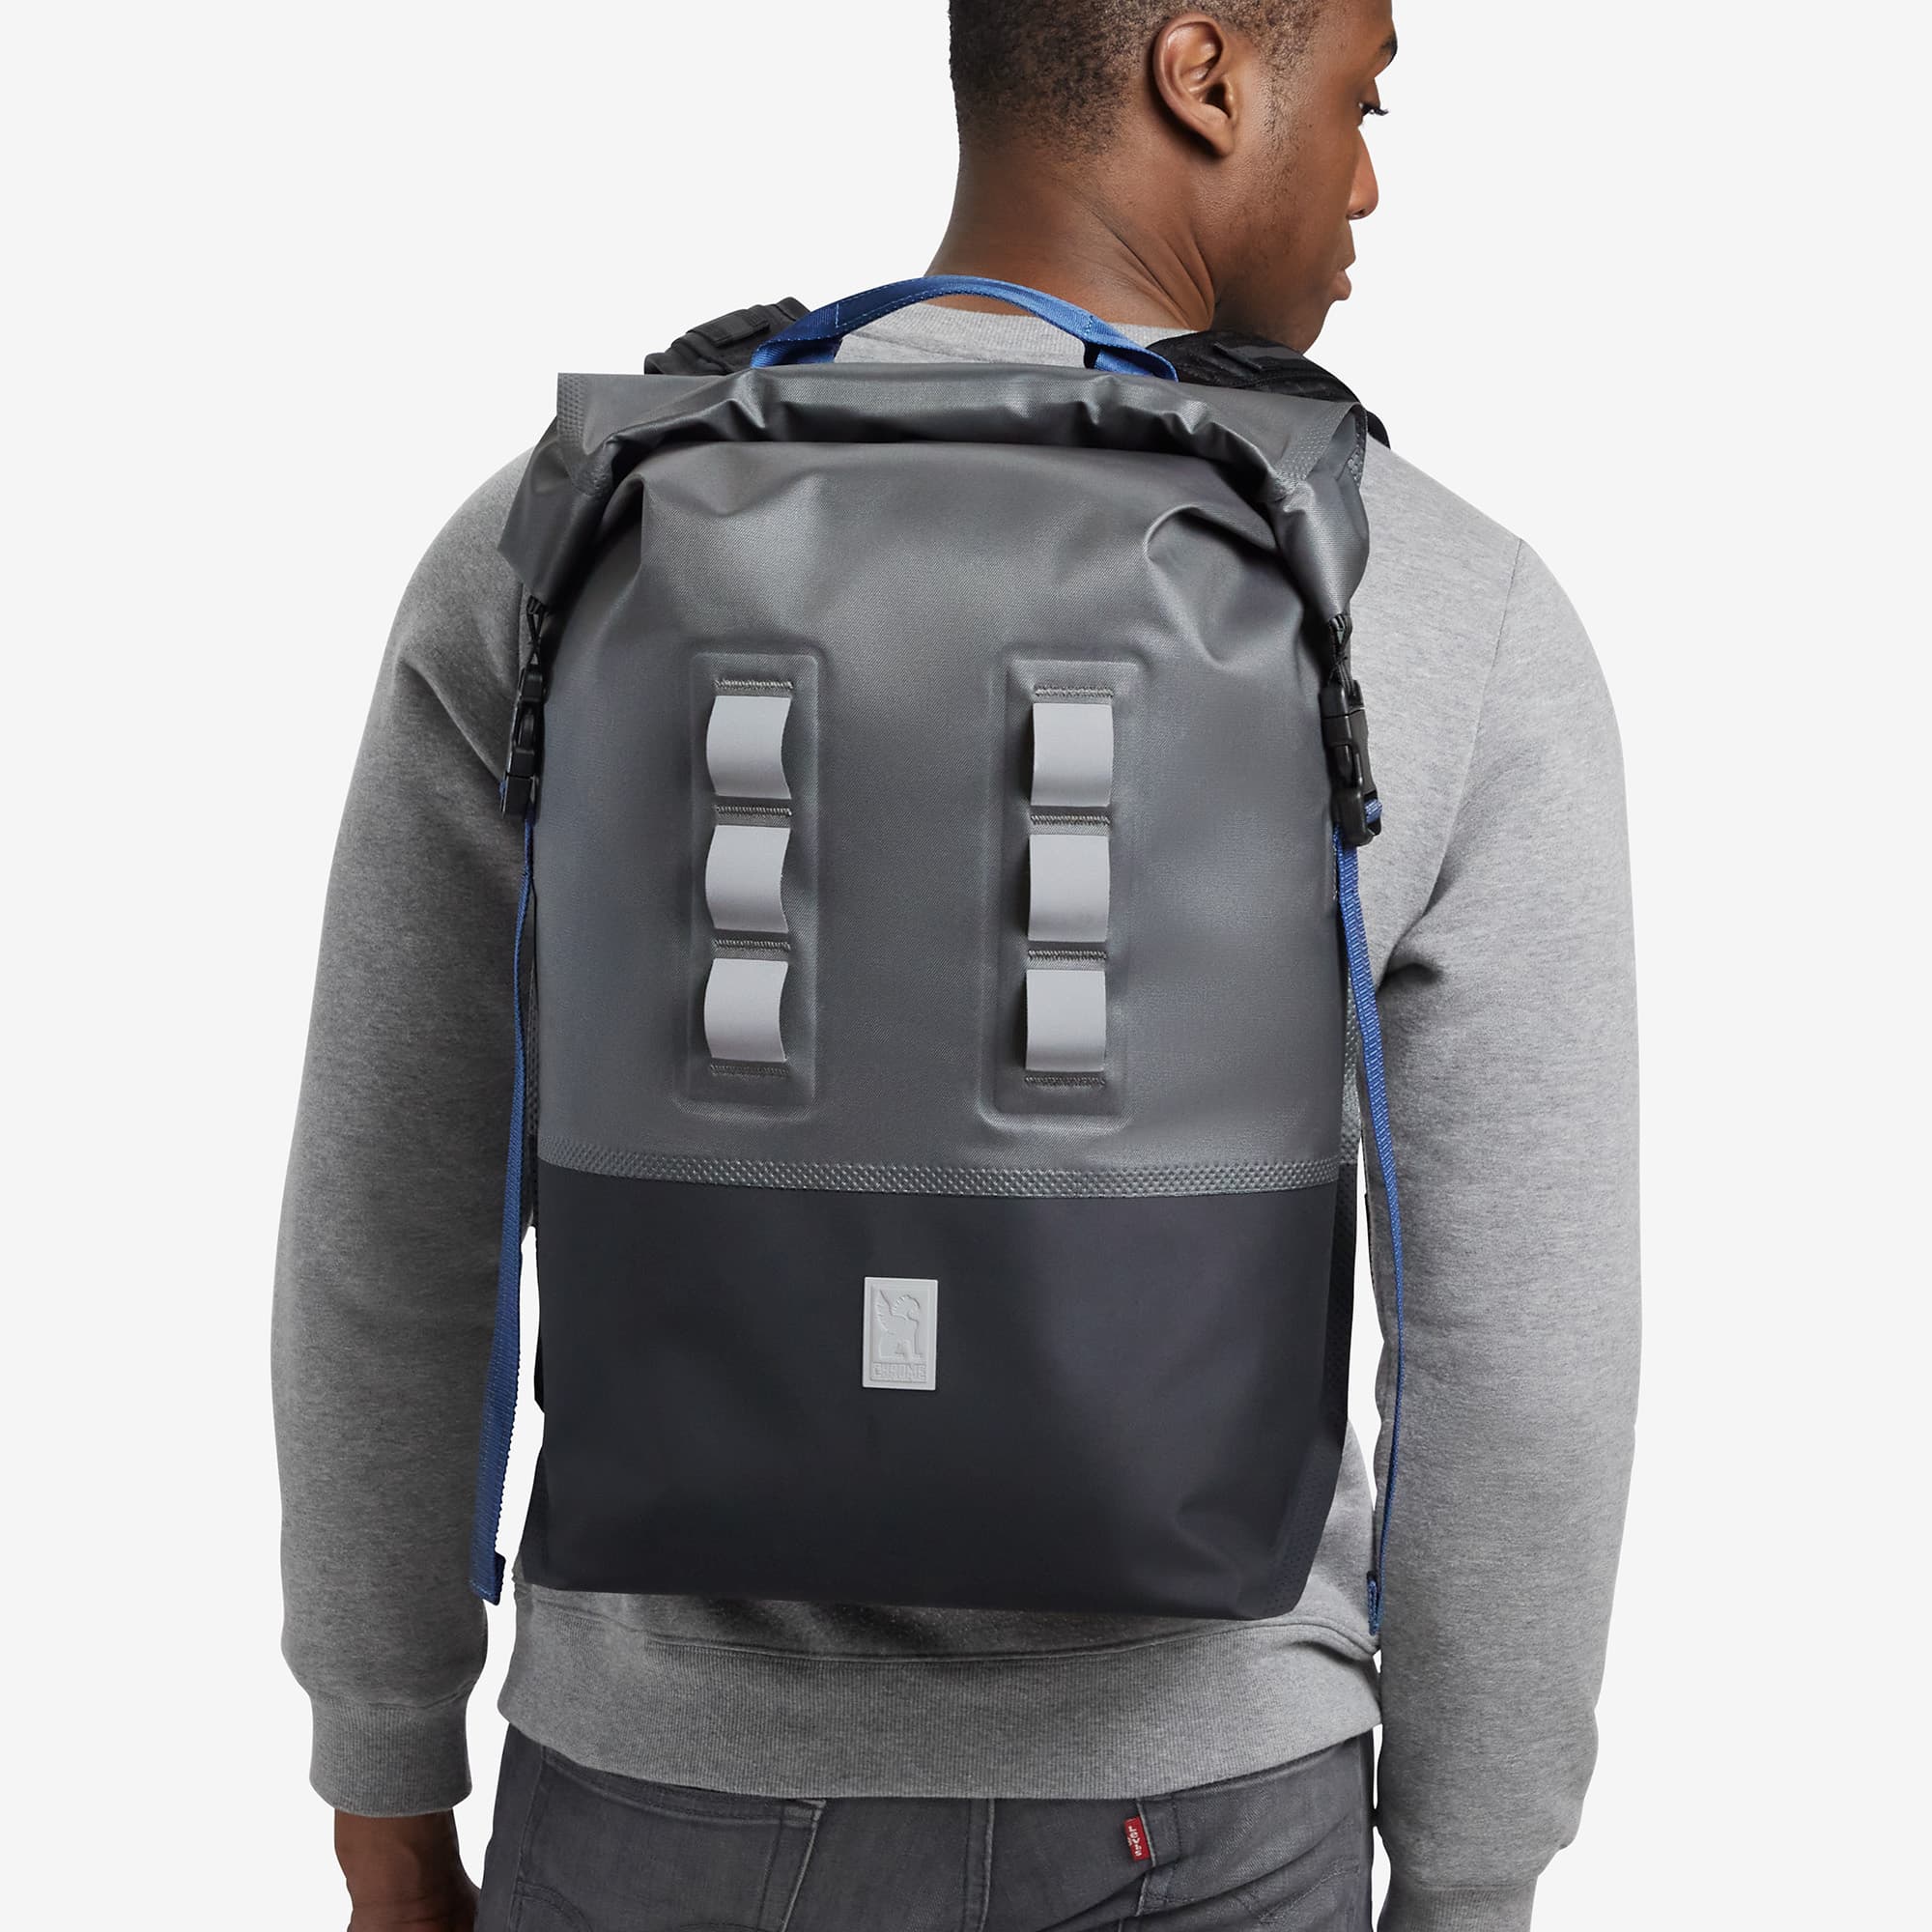 Waterproof 30L highly reflective backpack in grey worn by a man #color_fog